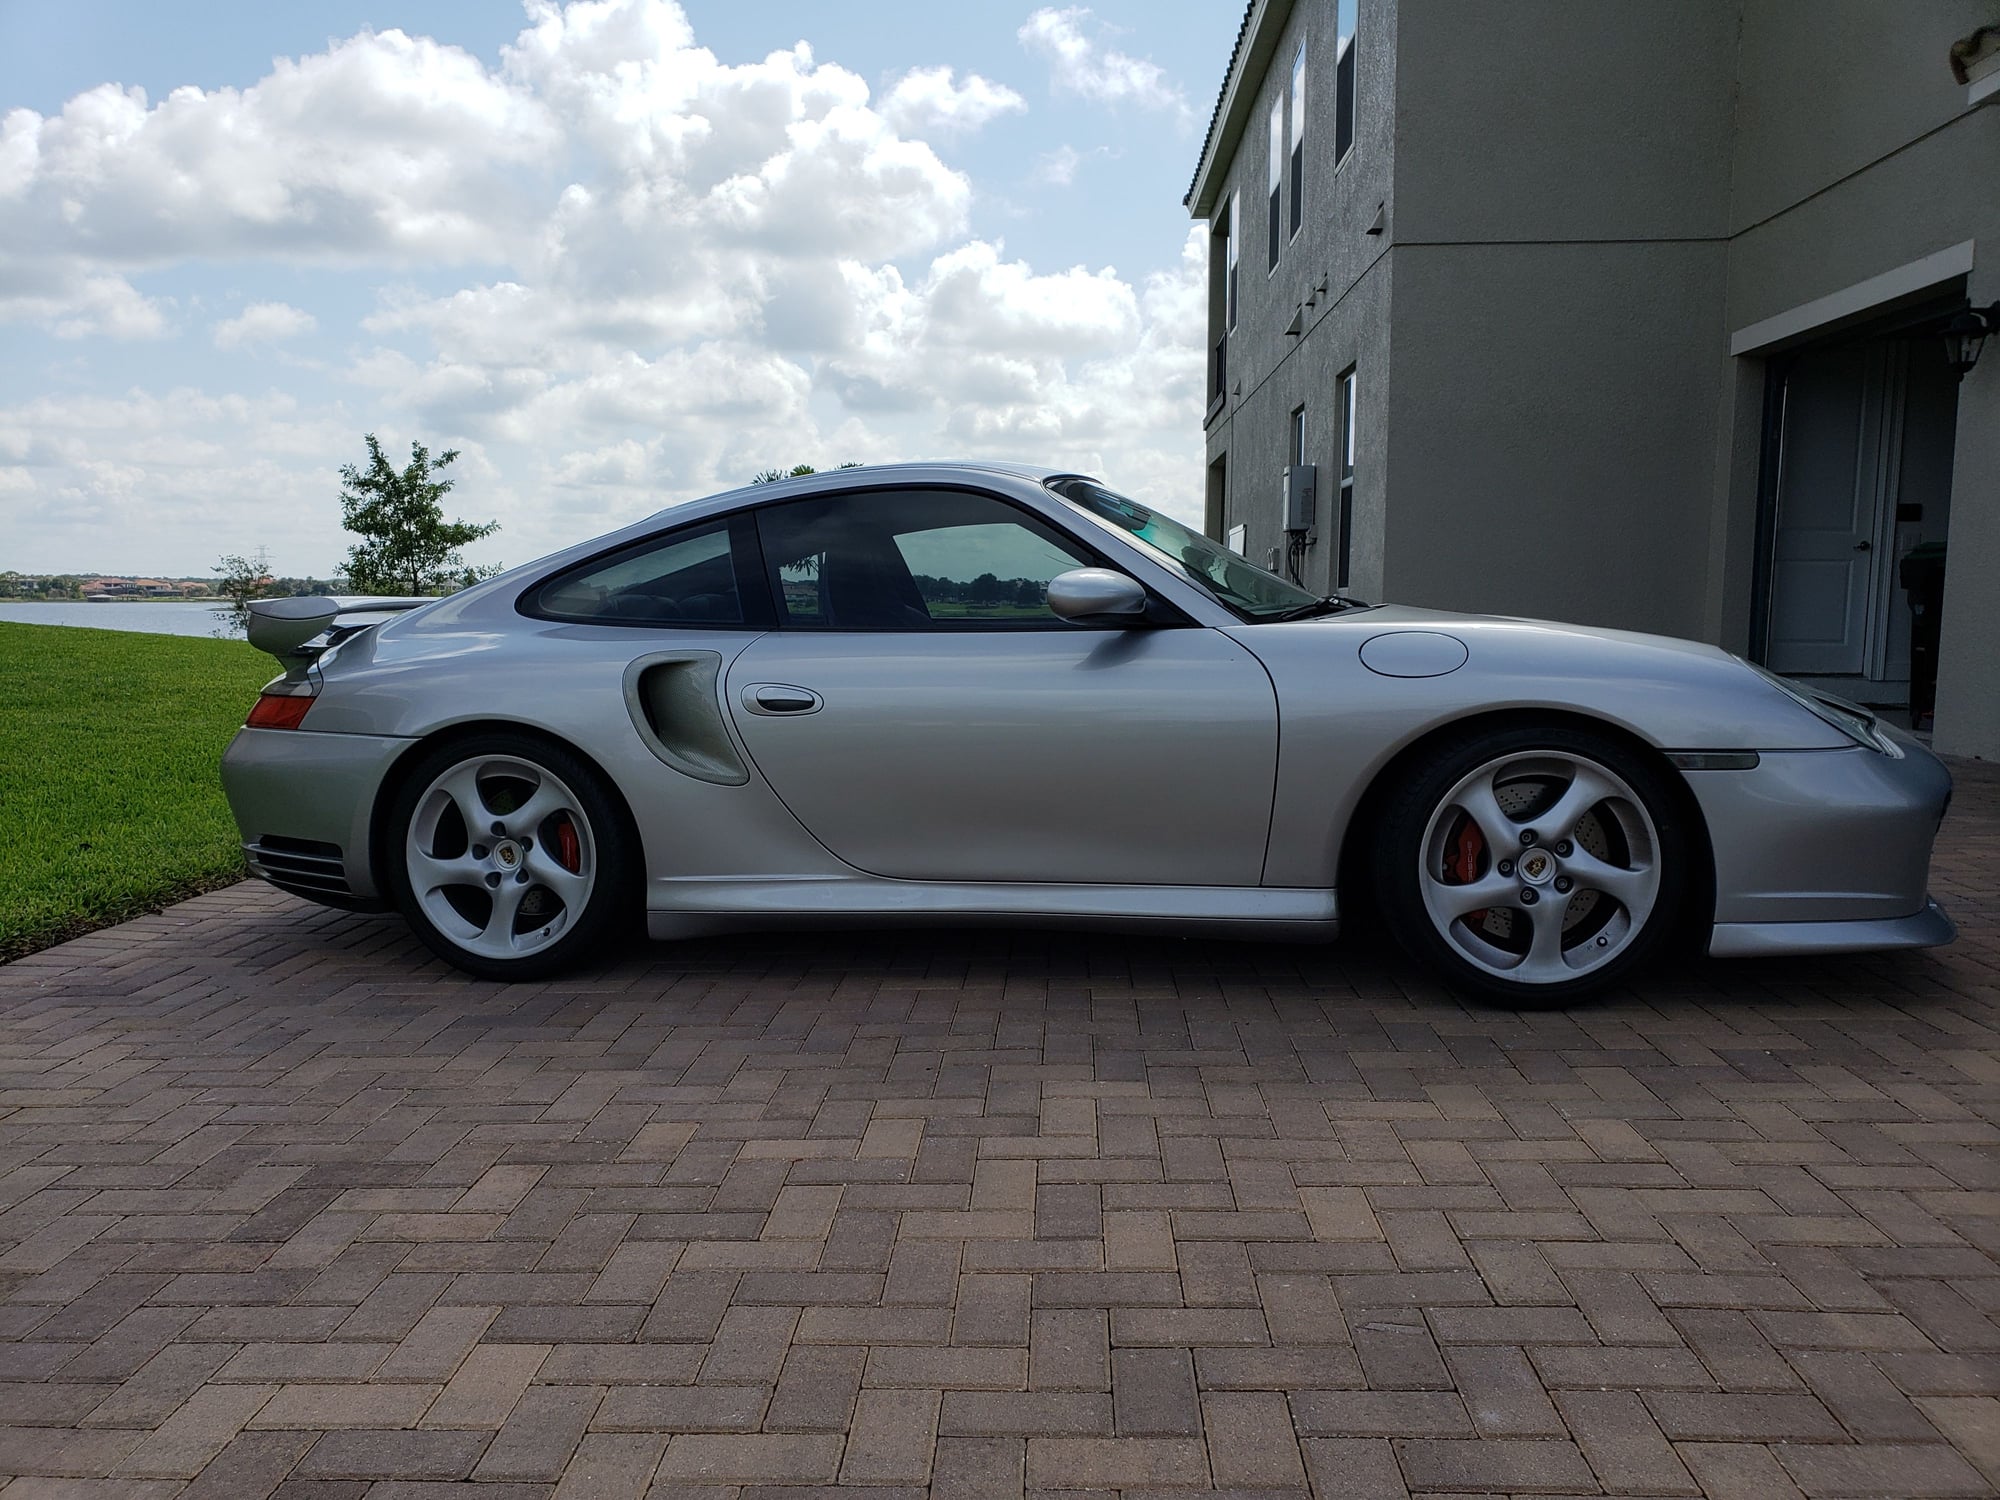 2003 Porsche 911 - 2003 996TT - Used - VIN wp0ab29943s686581 - 38,300 Miles - 6 cyl - AWD - Manual - Coupe - Silver - Winter Garden, FL 34787, United States